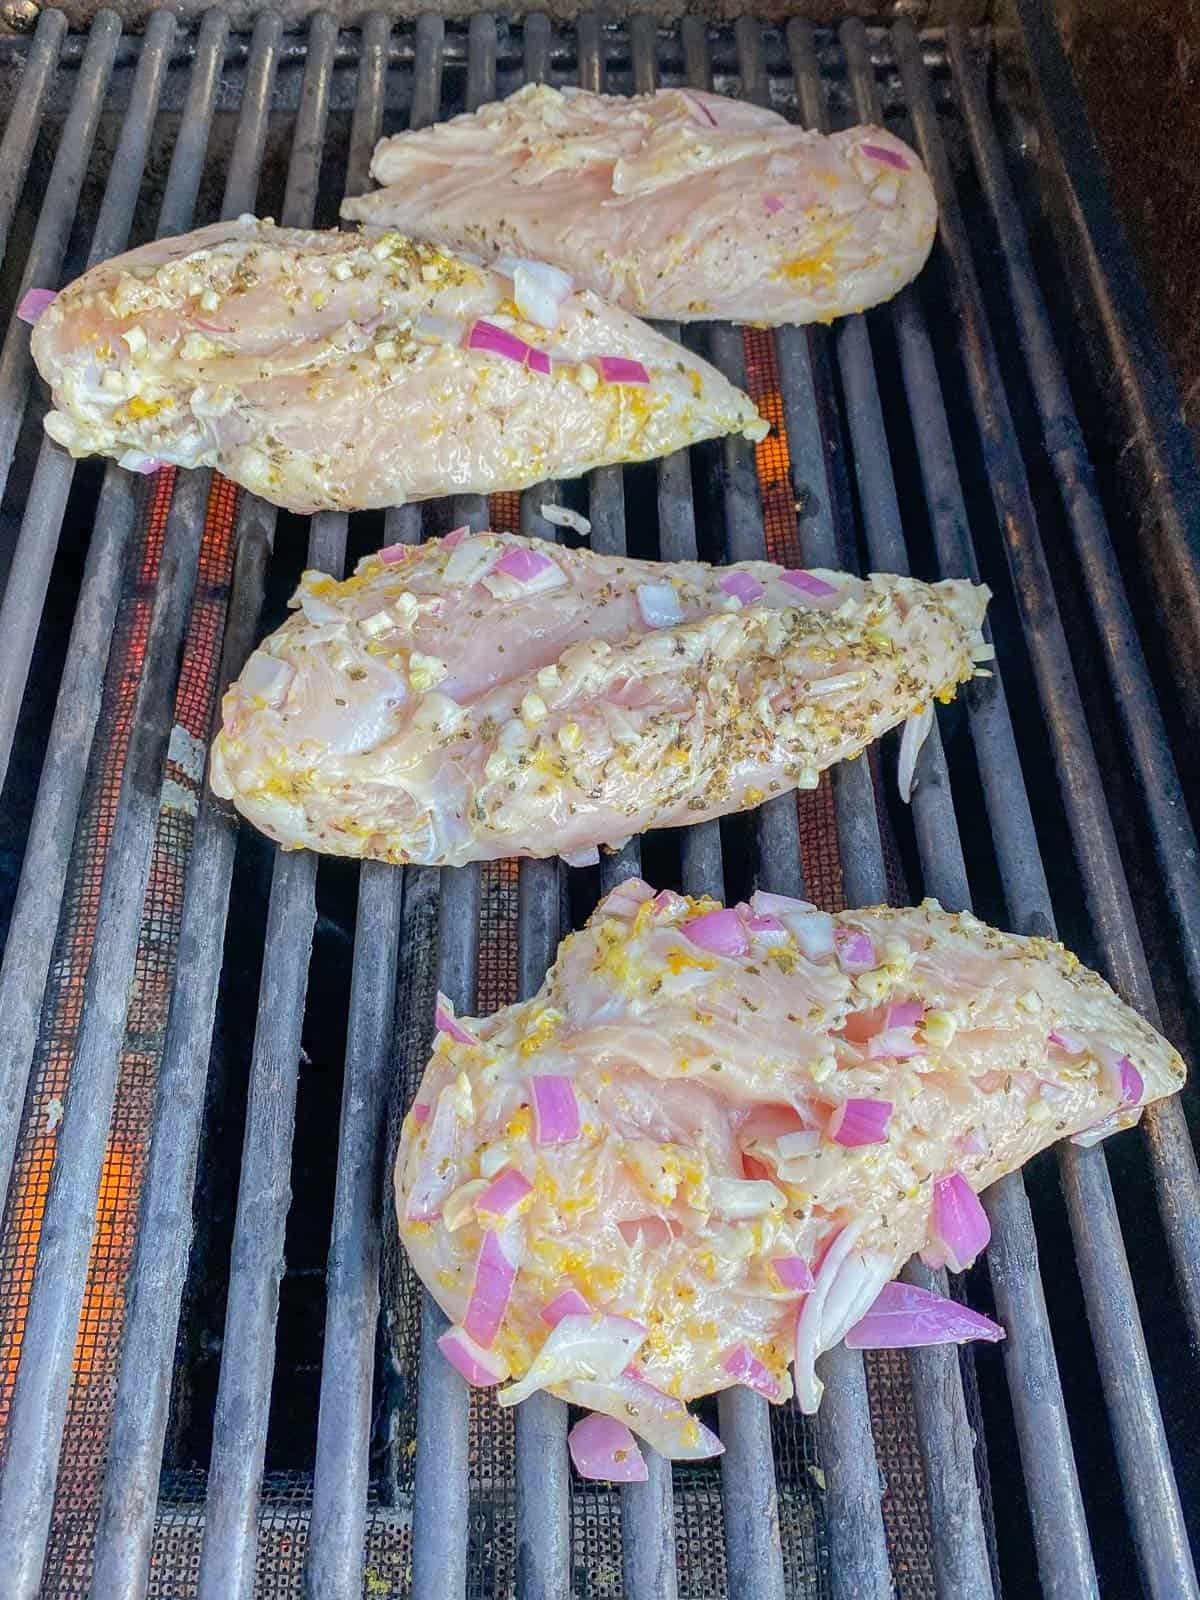 marinated chicken on the grill at the beginning of cooking